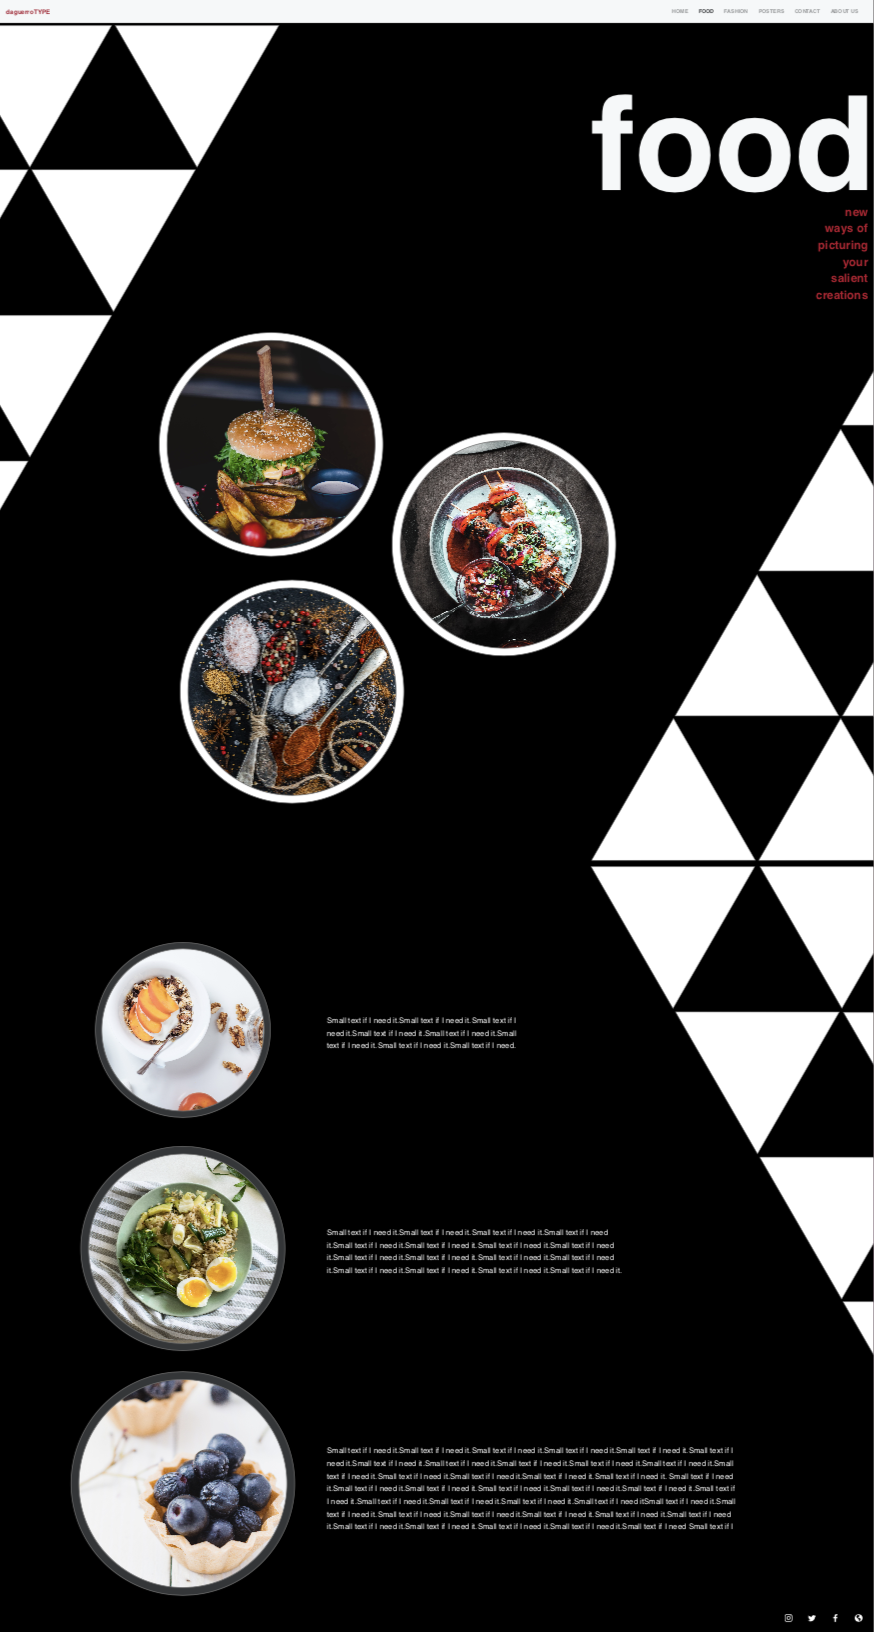 a food page mockup of a mock design studio. The food pictures are in circles, and there are triangles in the background.